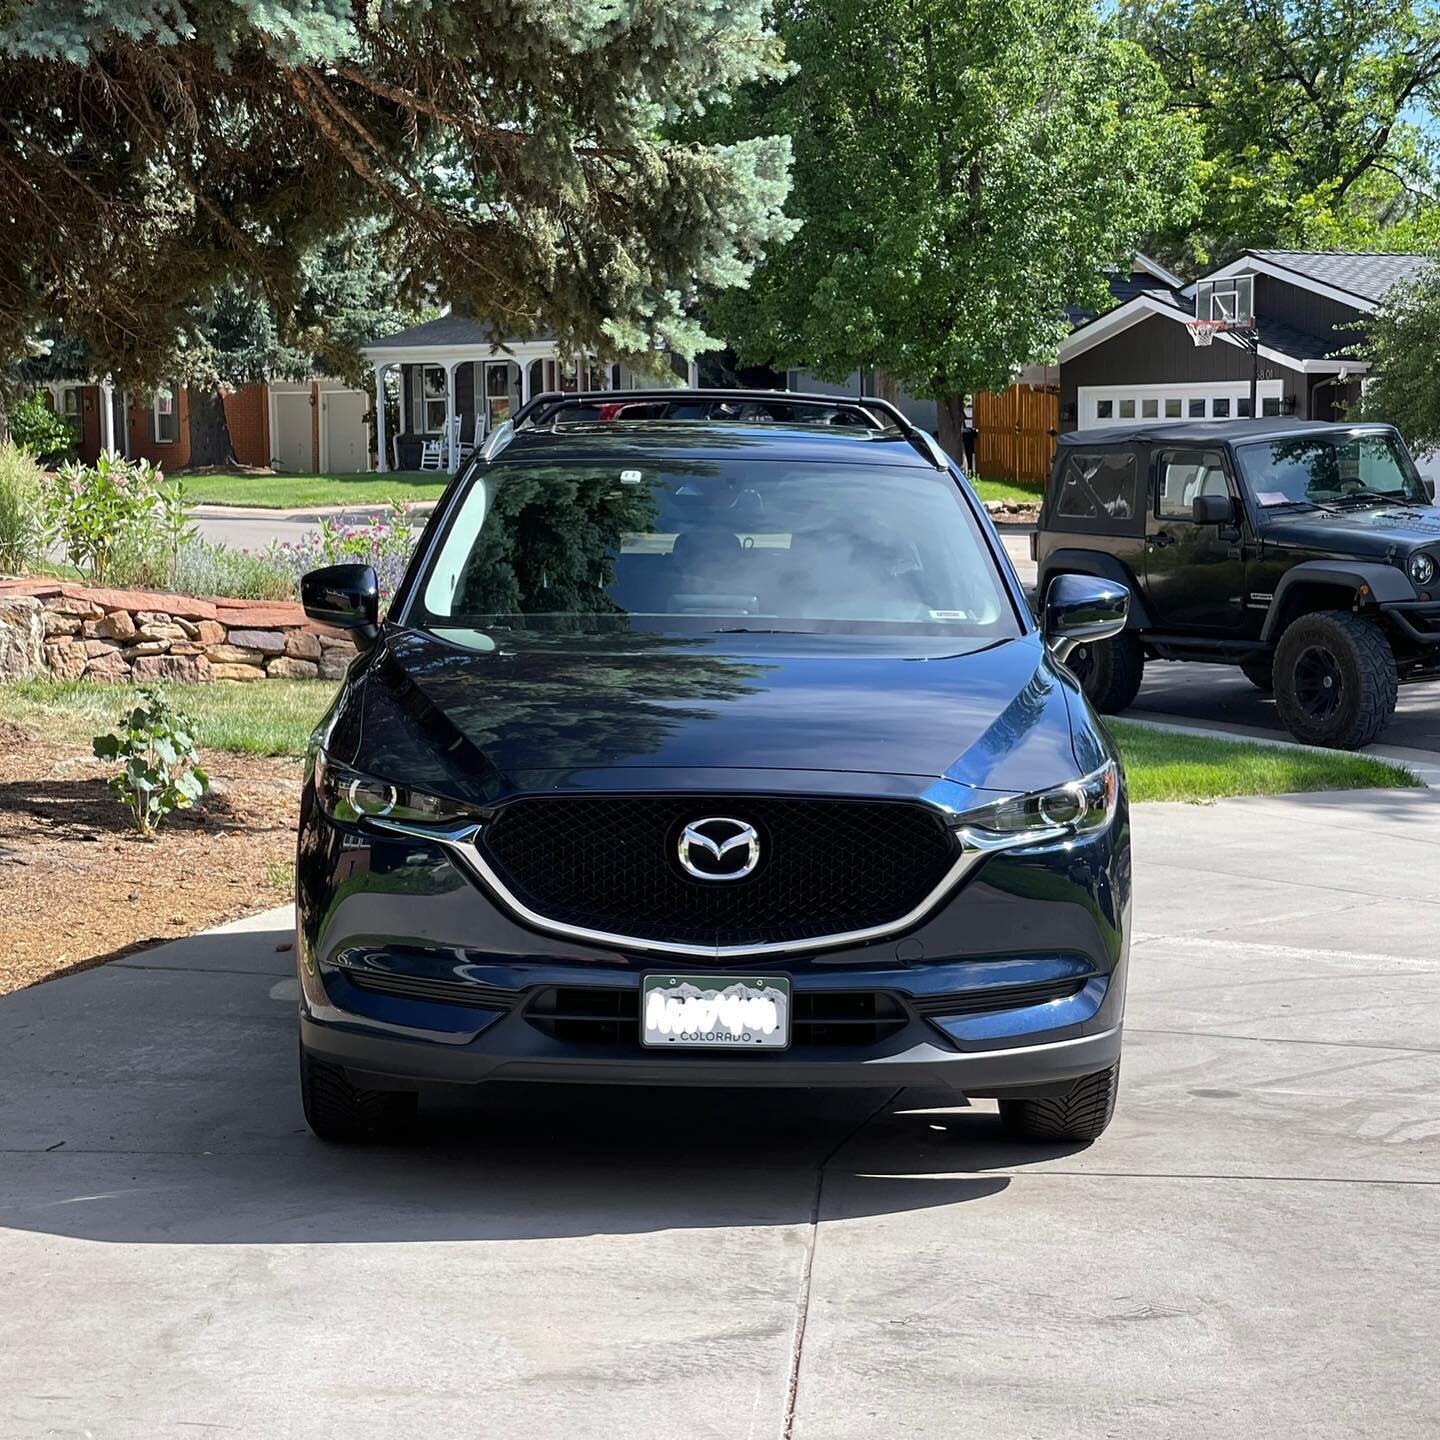 A nice refresh for this CX-5!